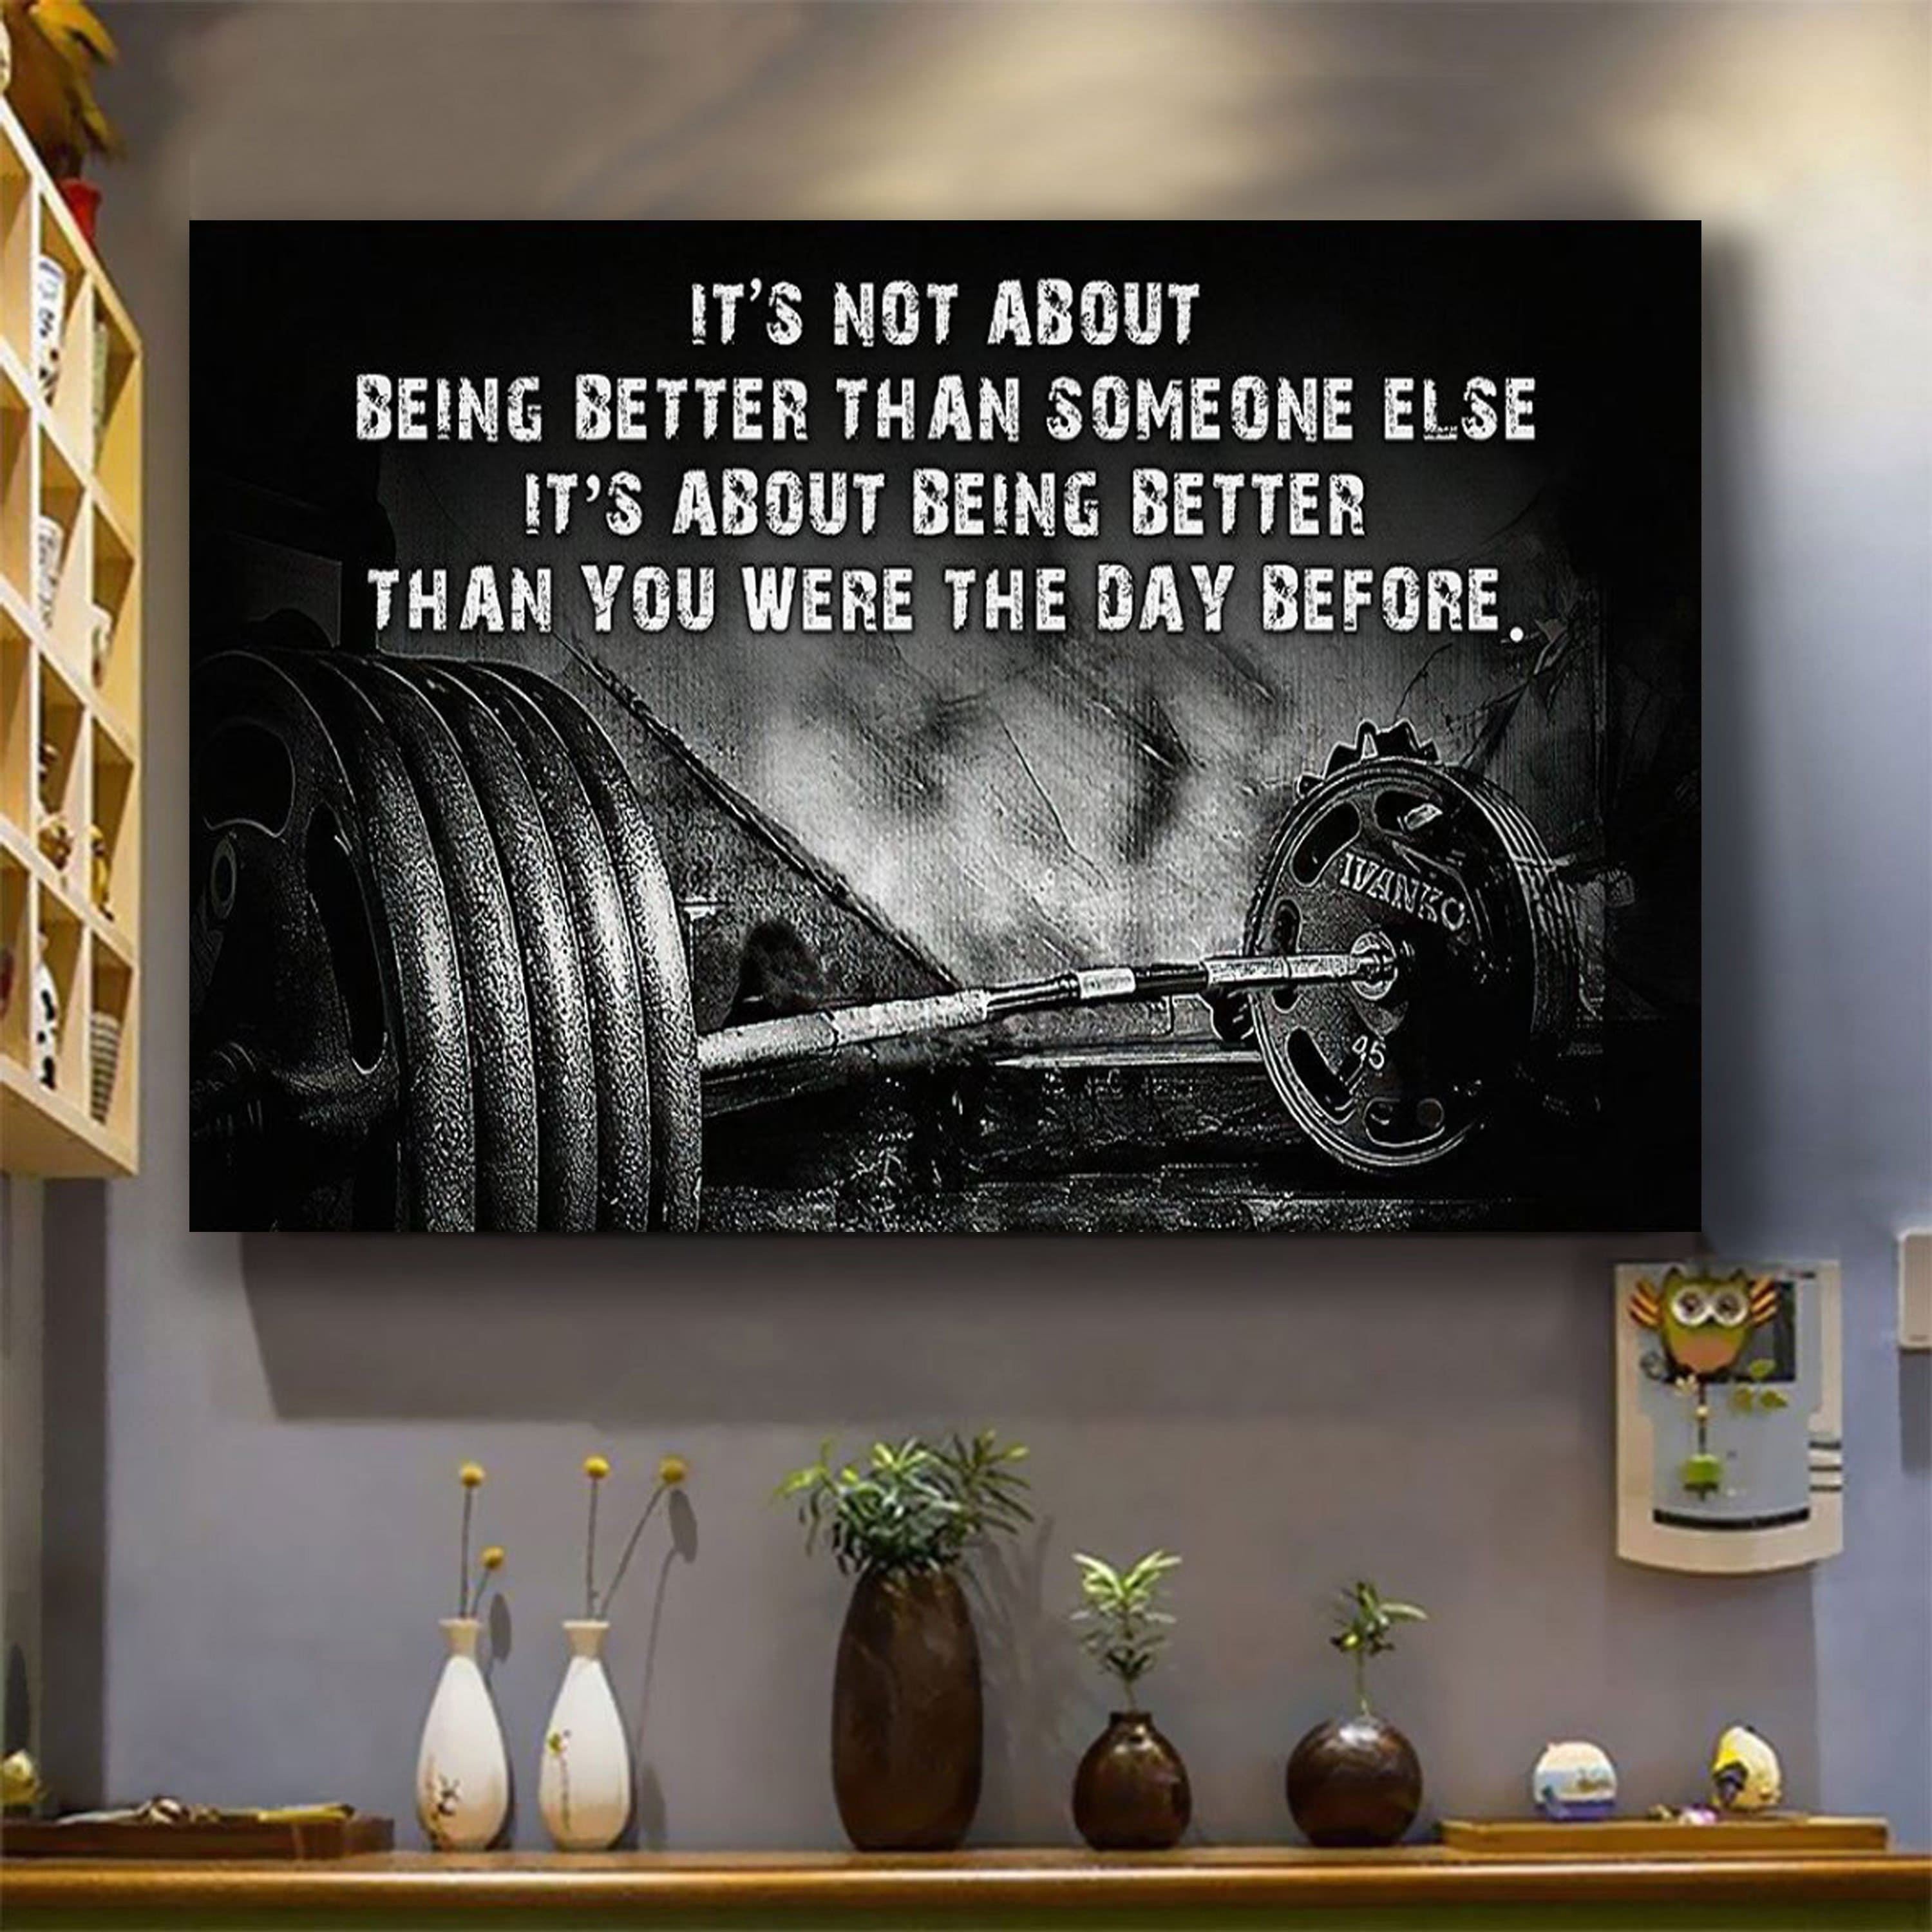 Softball customizable poster canvas - It is not about better than someone else, It is about being better than you were the day before